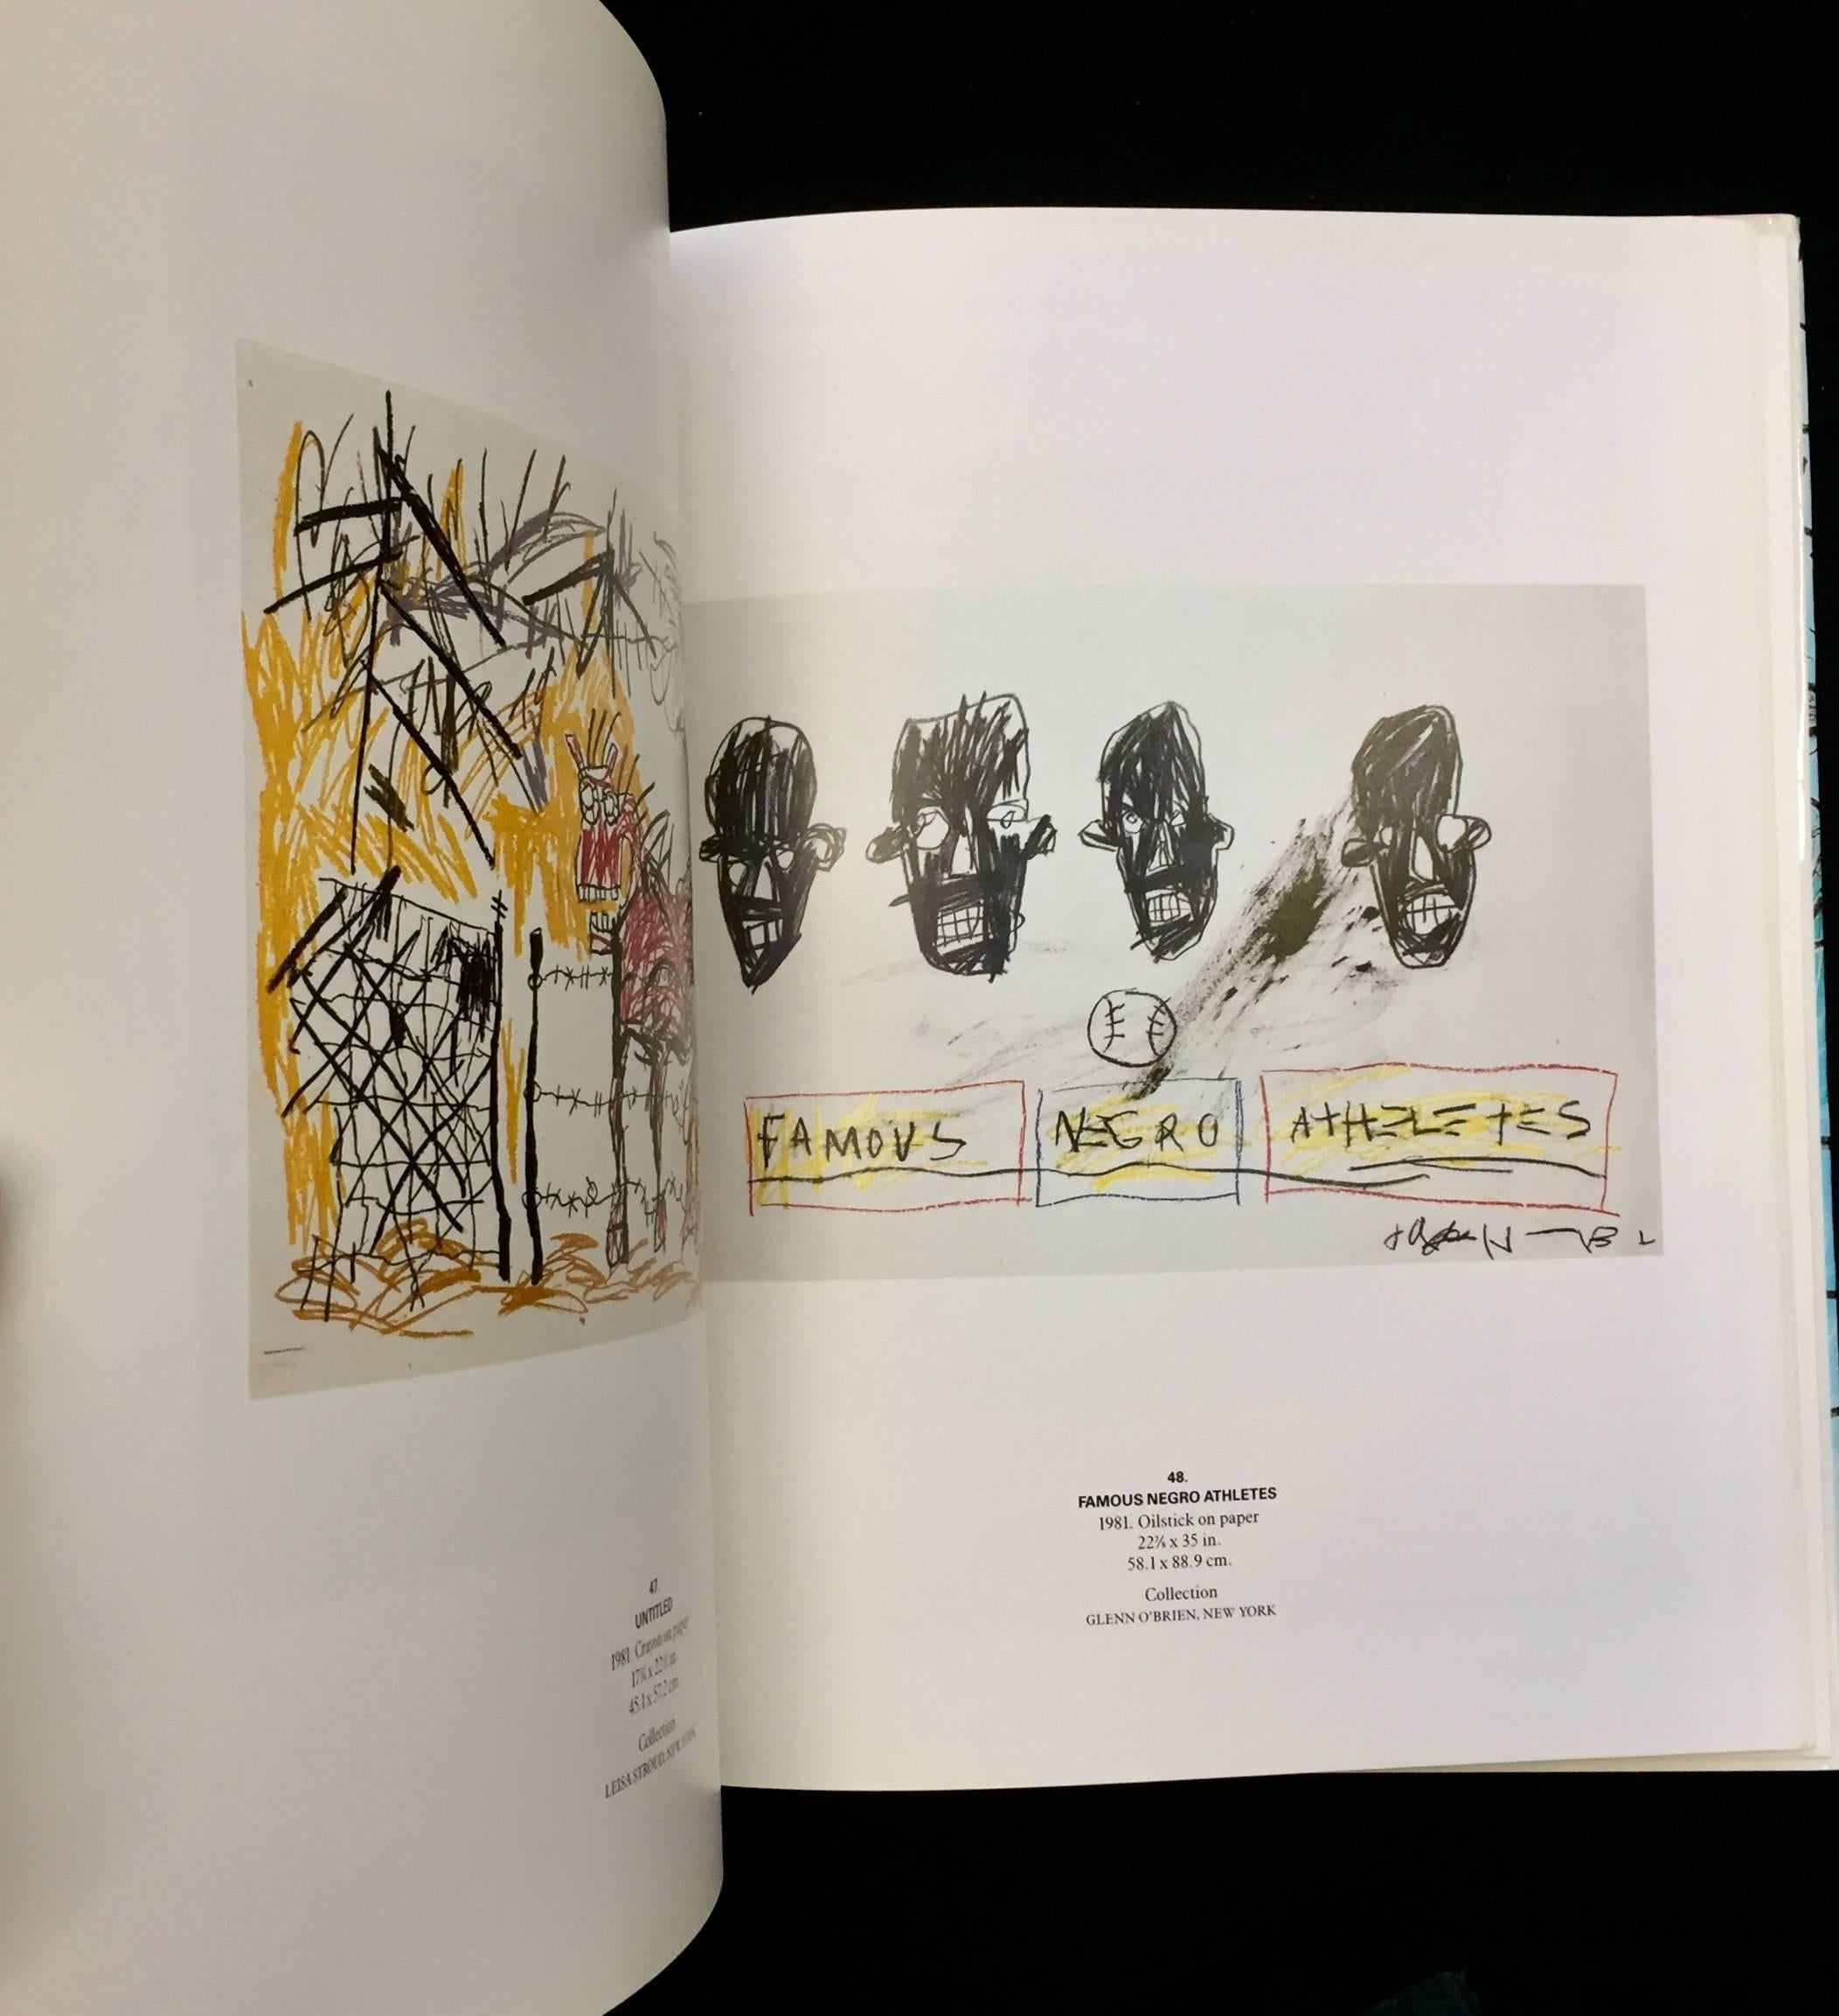 Jean-Michel Basquiat, Vrej Baghoomian Gallery, Exhibition Catalog, 1989 For Sale 1